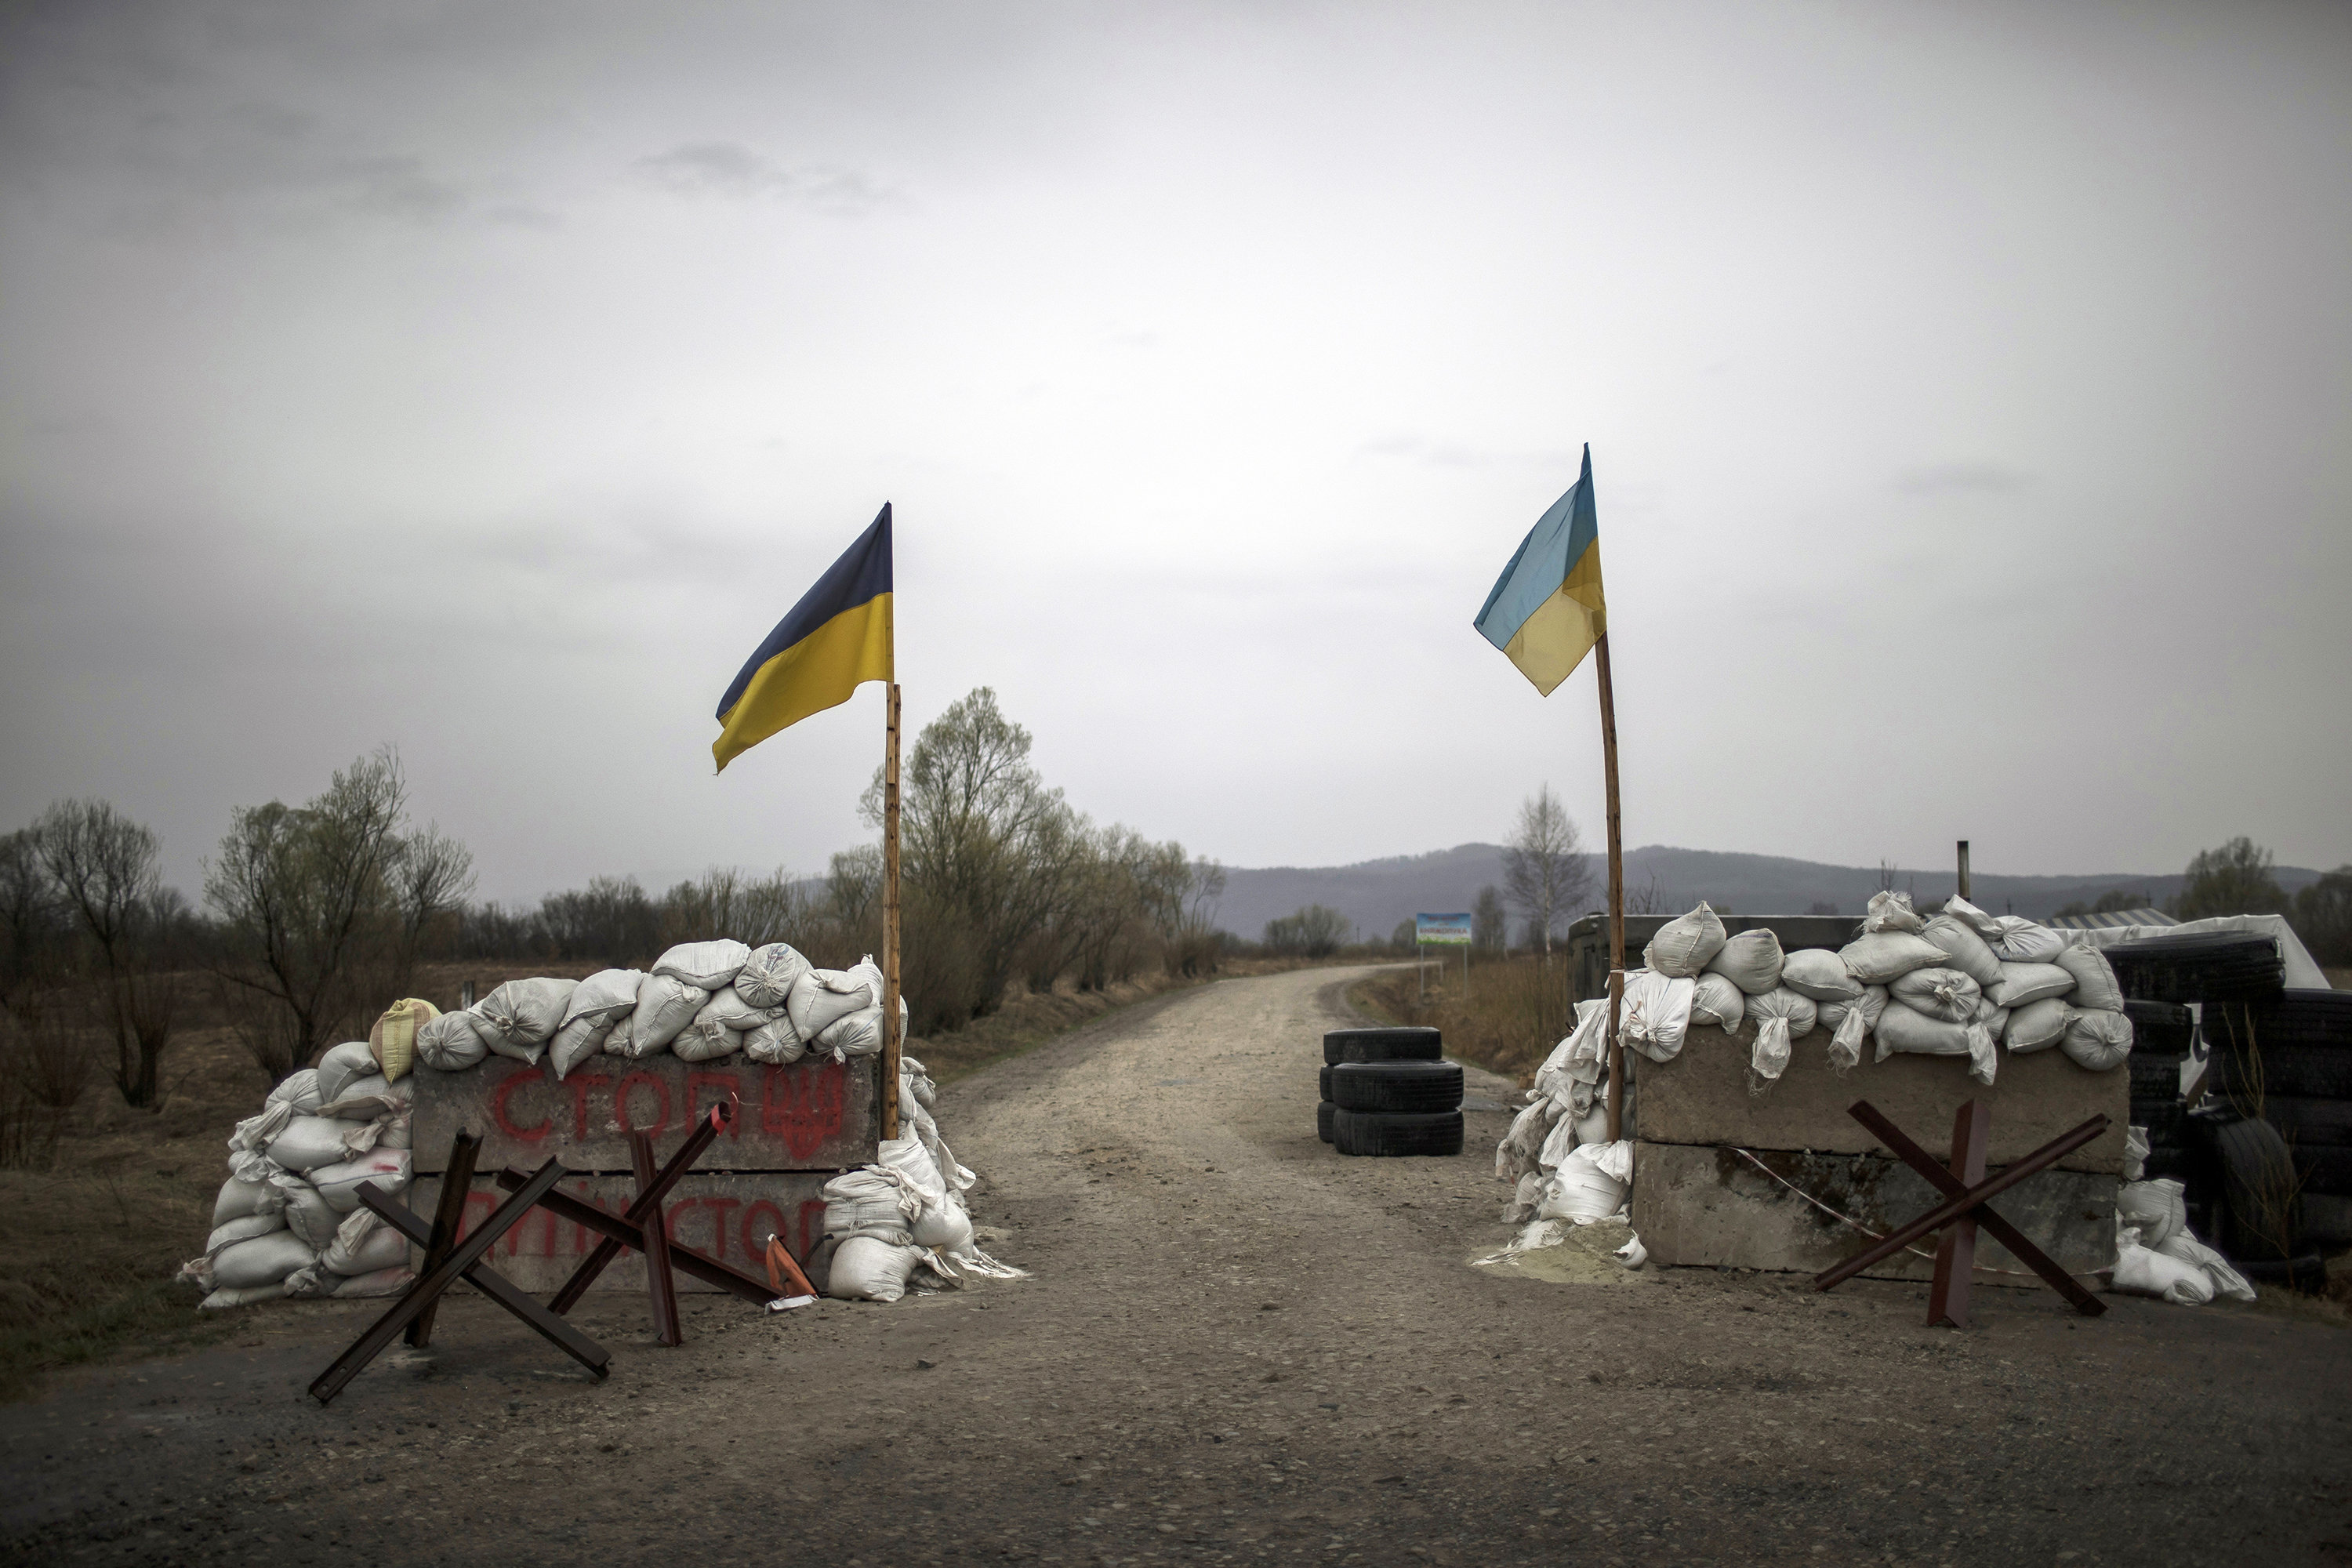 Barricades built by citizens at neighborhood entrances are seen as Russian attacks continue on Ukraine in Lviv, Ukraine on April 15.